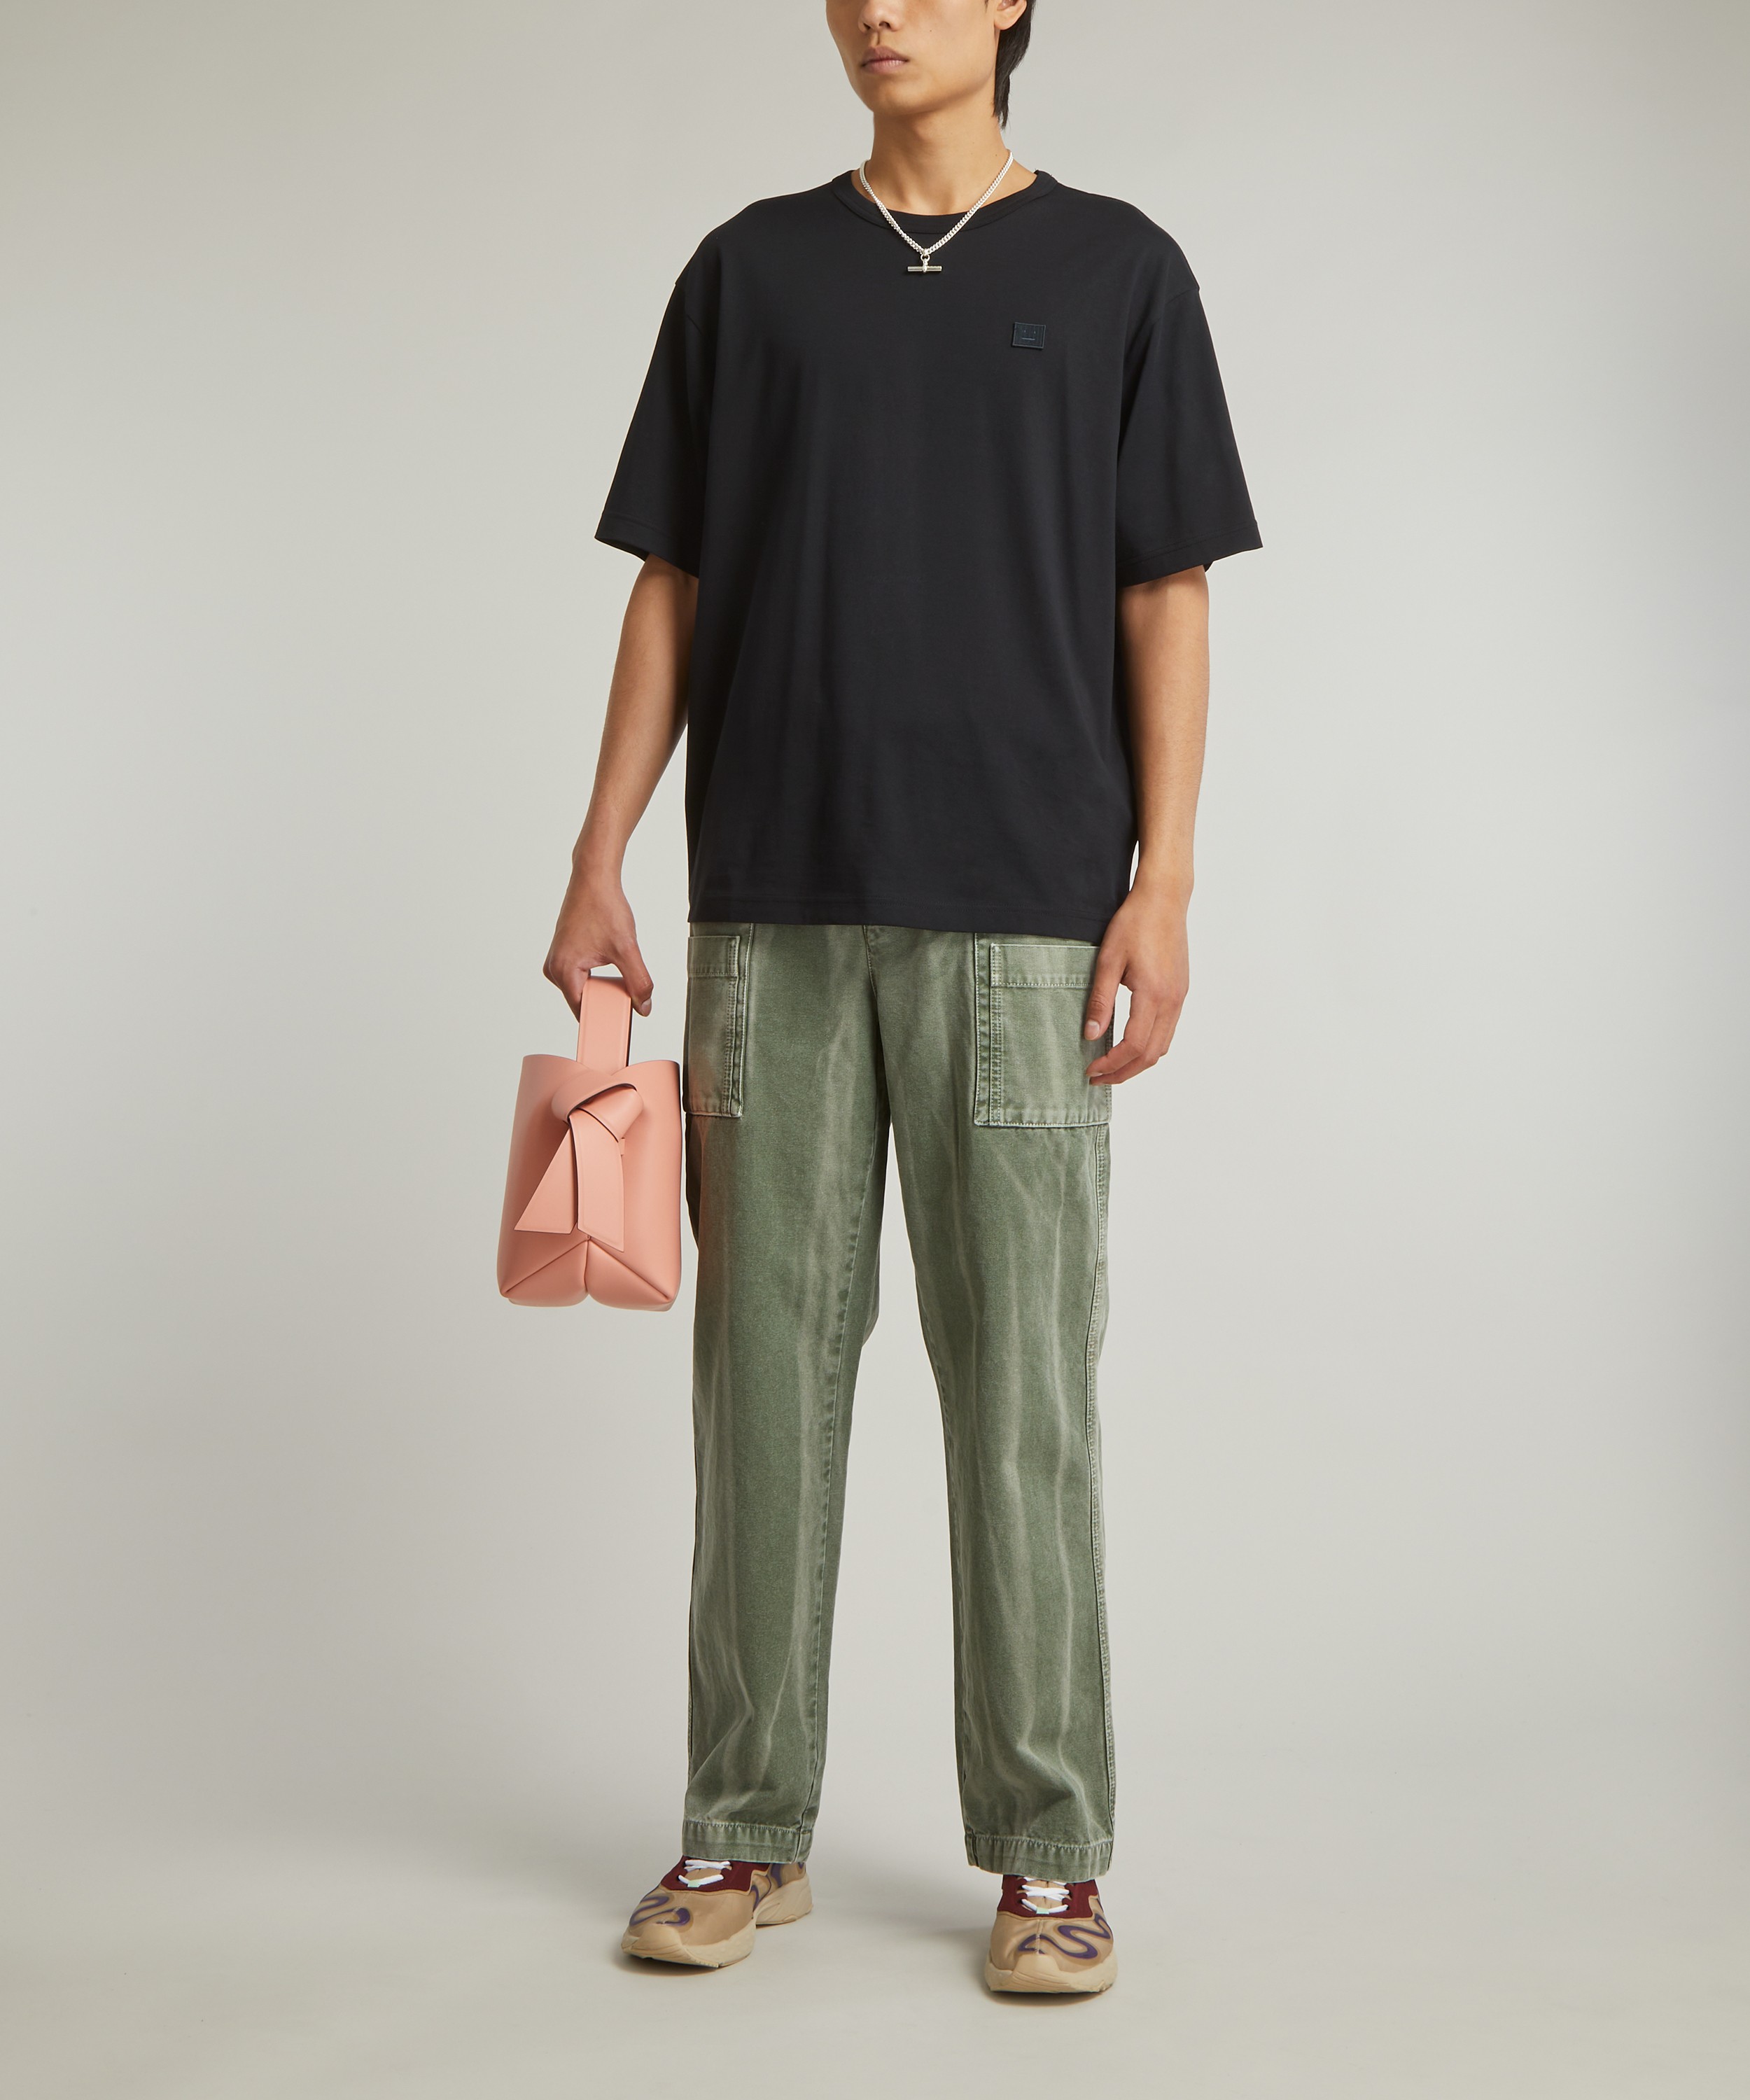 Acne Studios - Relaxed Fit T-Shirt image number 1